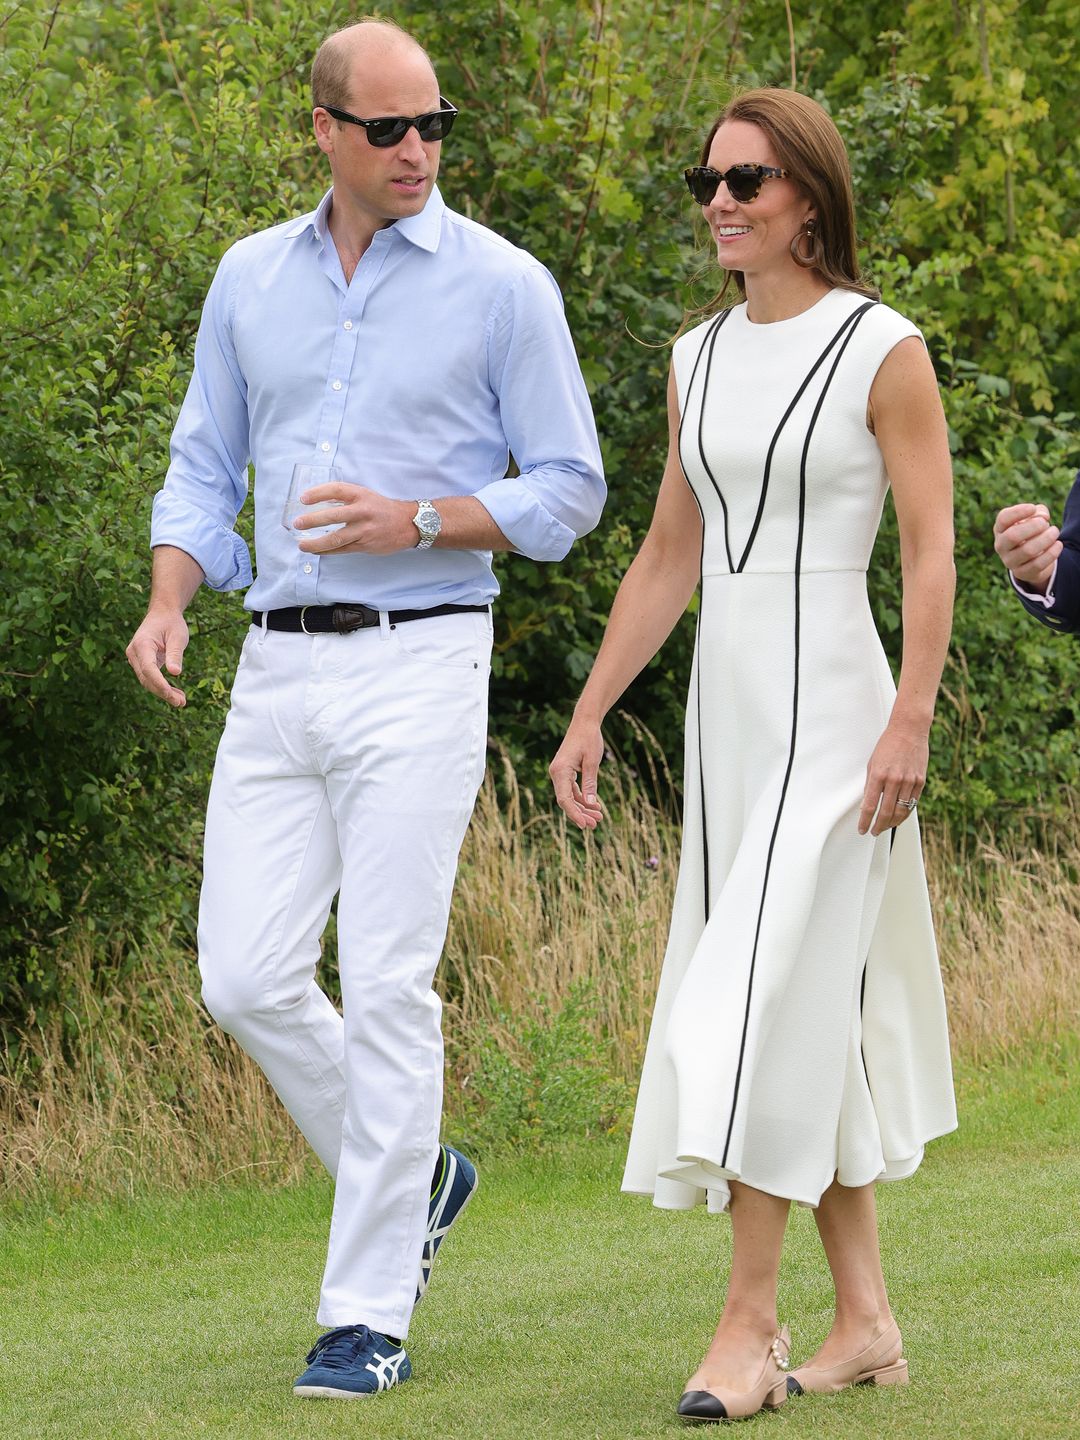 WINDSOR, ENGLAND - JULY 06: Prince William, Duke of Cambridge and Catherine, Duchess of Cambridge arrive for the Royal Charity Polo Cup 2022 at Guards Polo Club  during the Outsourcing Inc. Royal Polo Cup at Guards Polo Club, Flemish Farm on July 06, 2022 in Windsor, England. (Photo by Chris Jackson/Getty Images for TLA Worldwide)